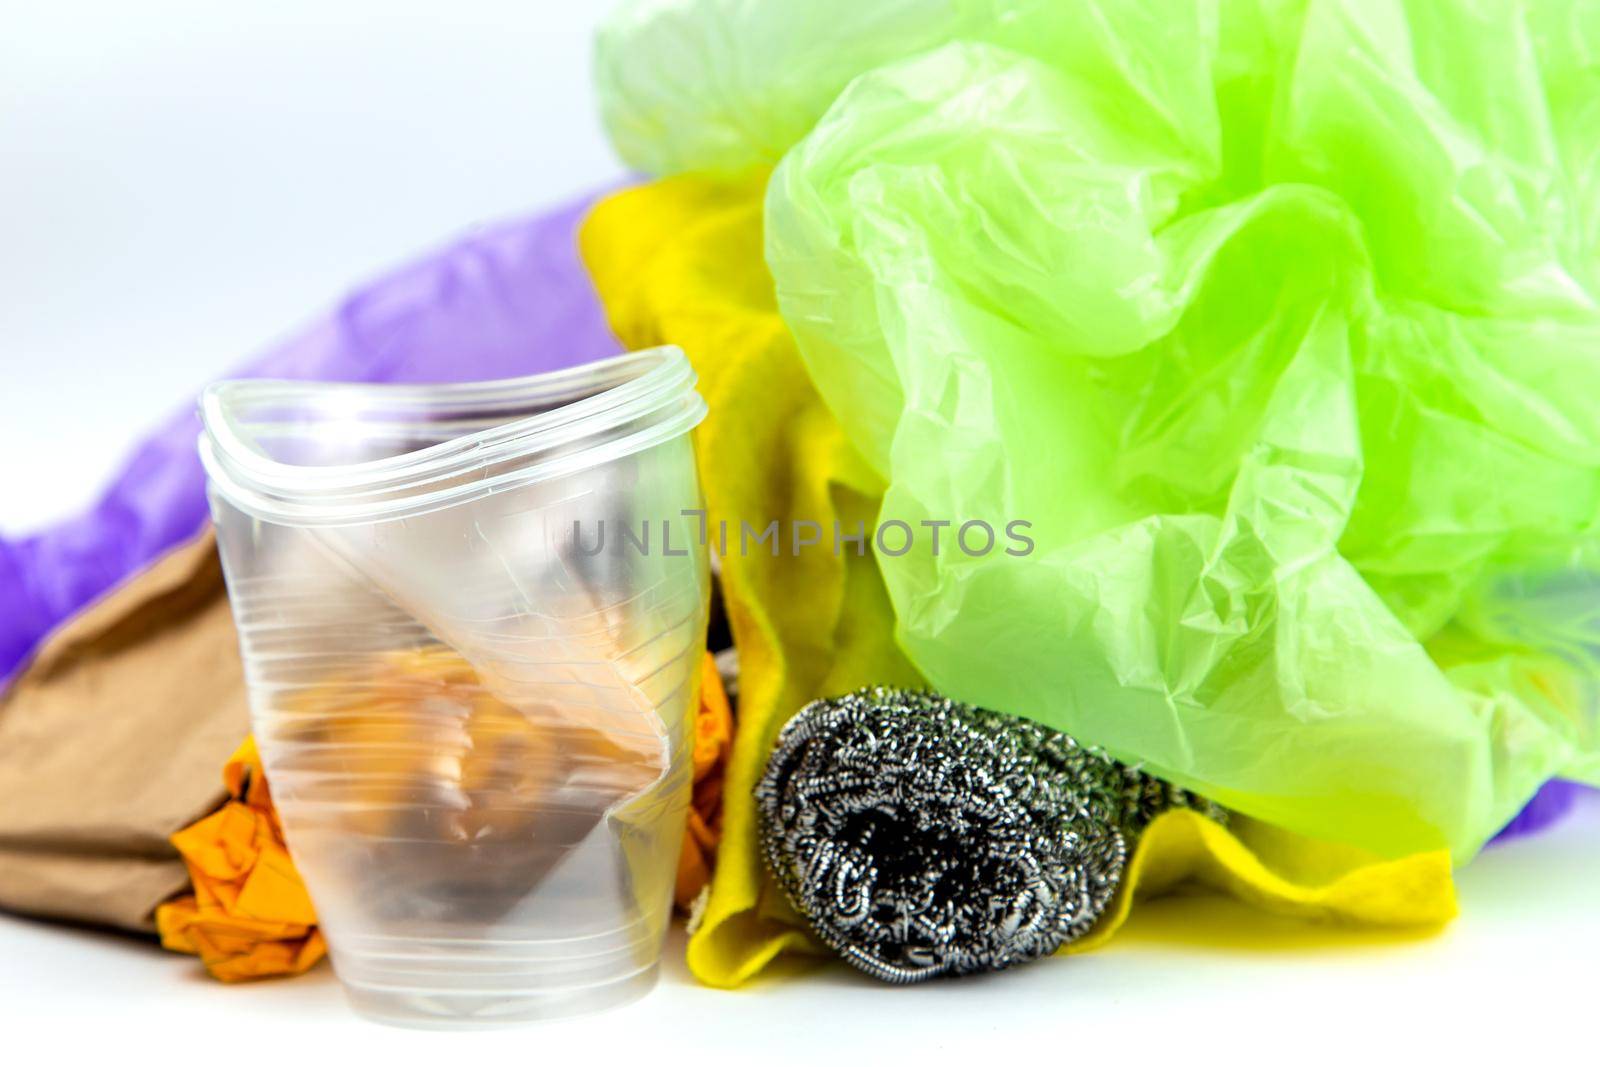 Concept of garbage and pollution. A pile of trash, crumpled plastic cup, packages, paper isolate on a white background.